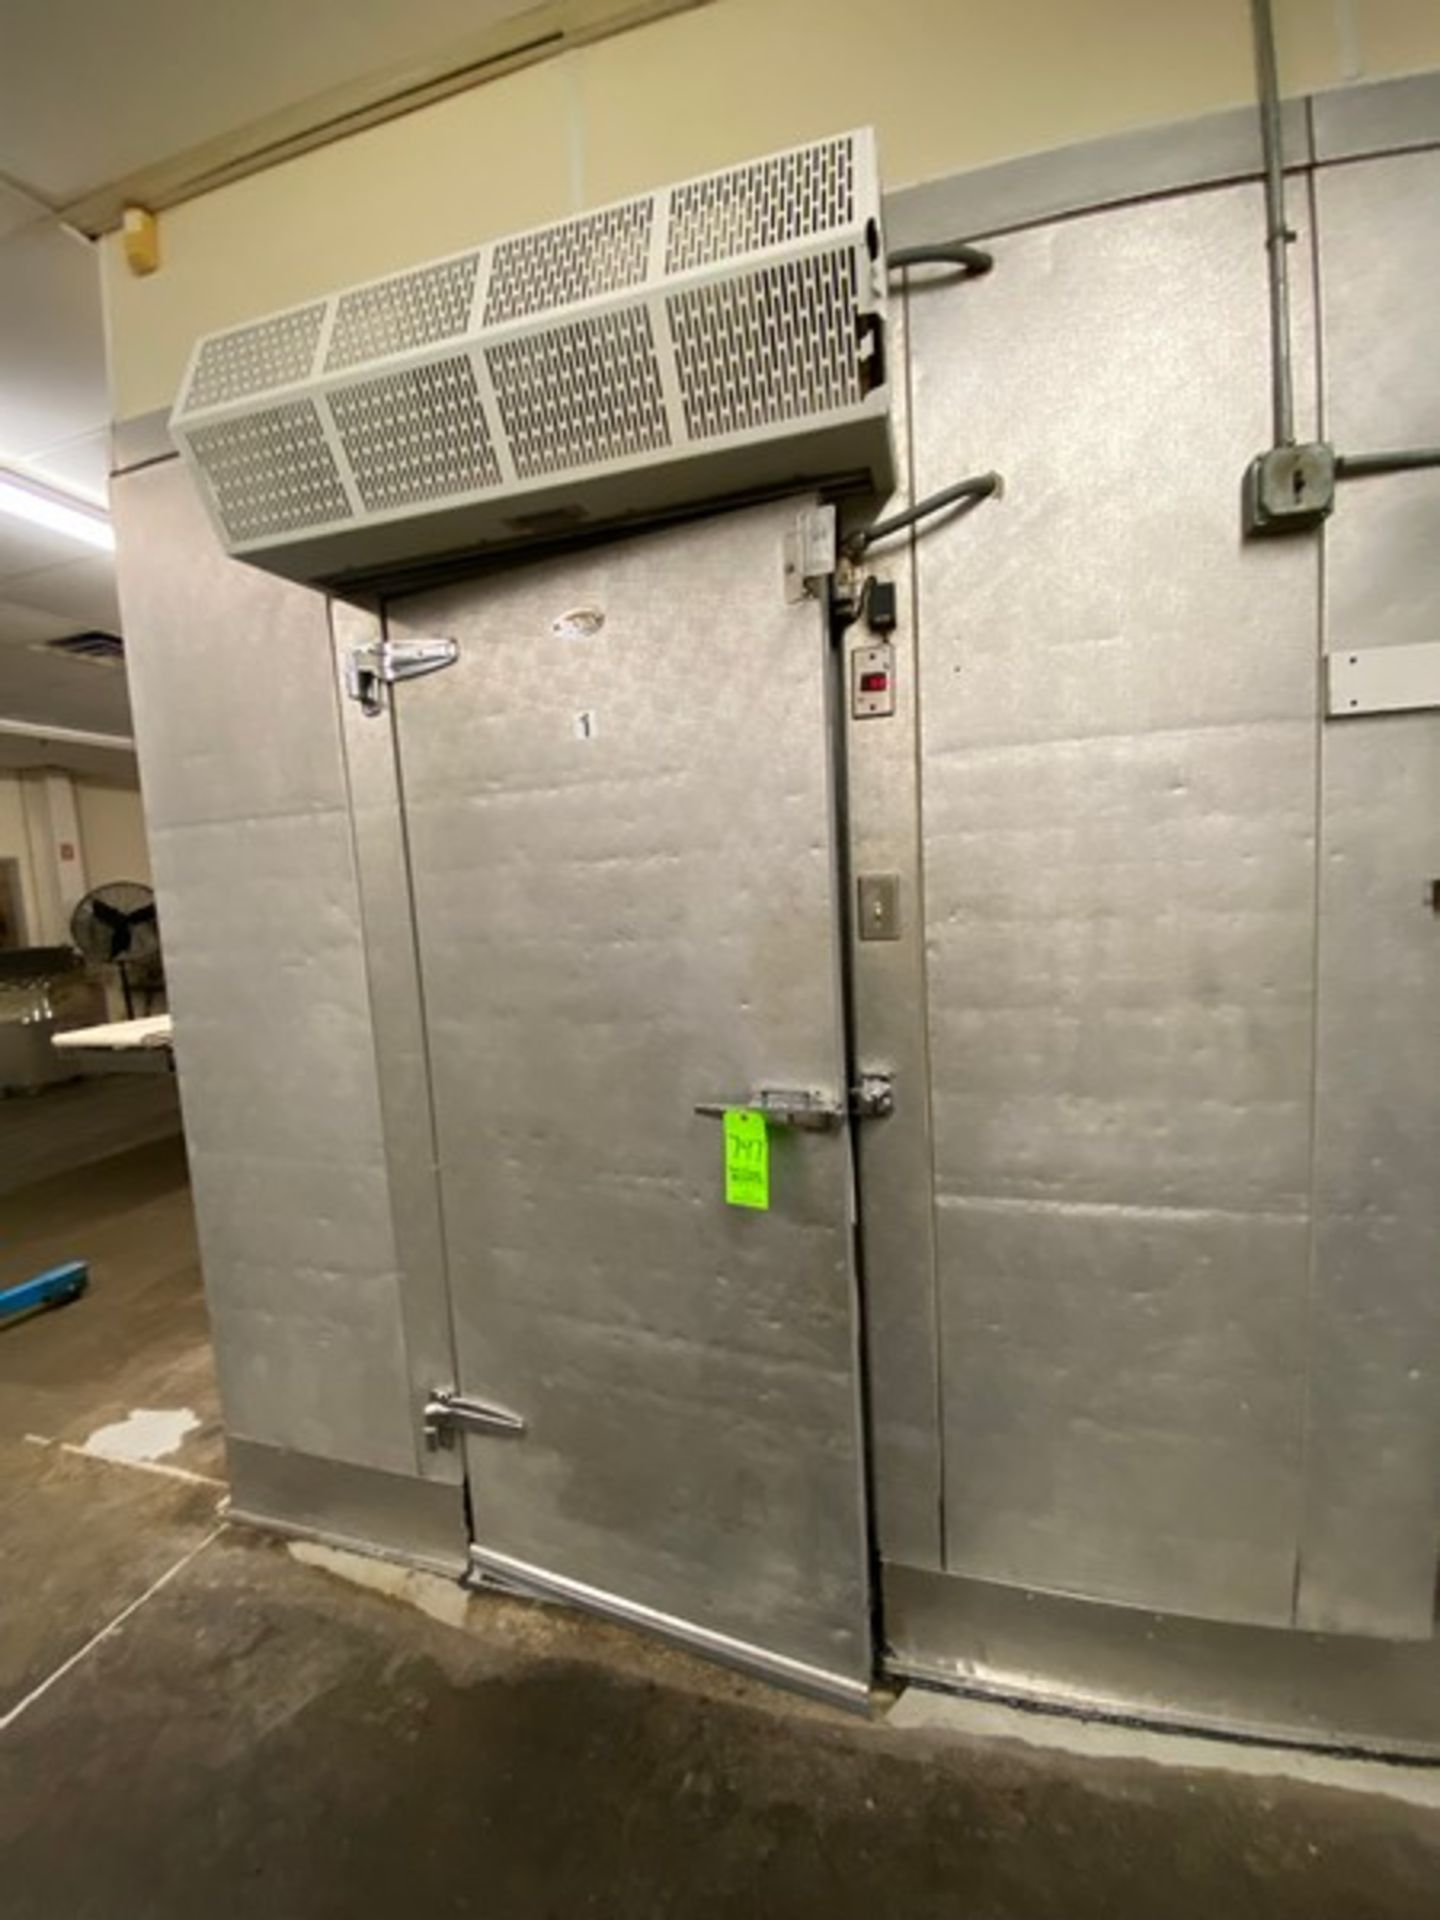 WALK-IN BLAST FREEZER, WITH (2) WERNER 3-FAN BLOWER UNITS INSIDE THE UNITS, WITH (2) DOORS (LOCATED - Bild 2 aus 6